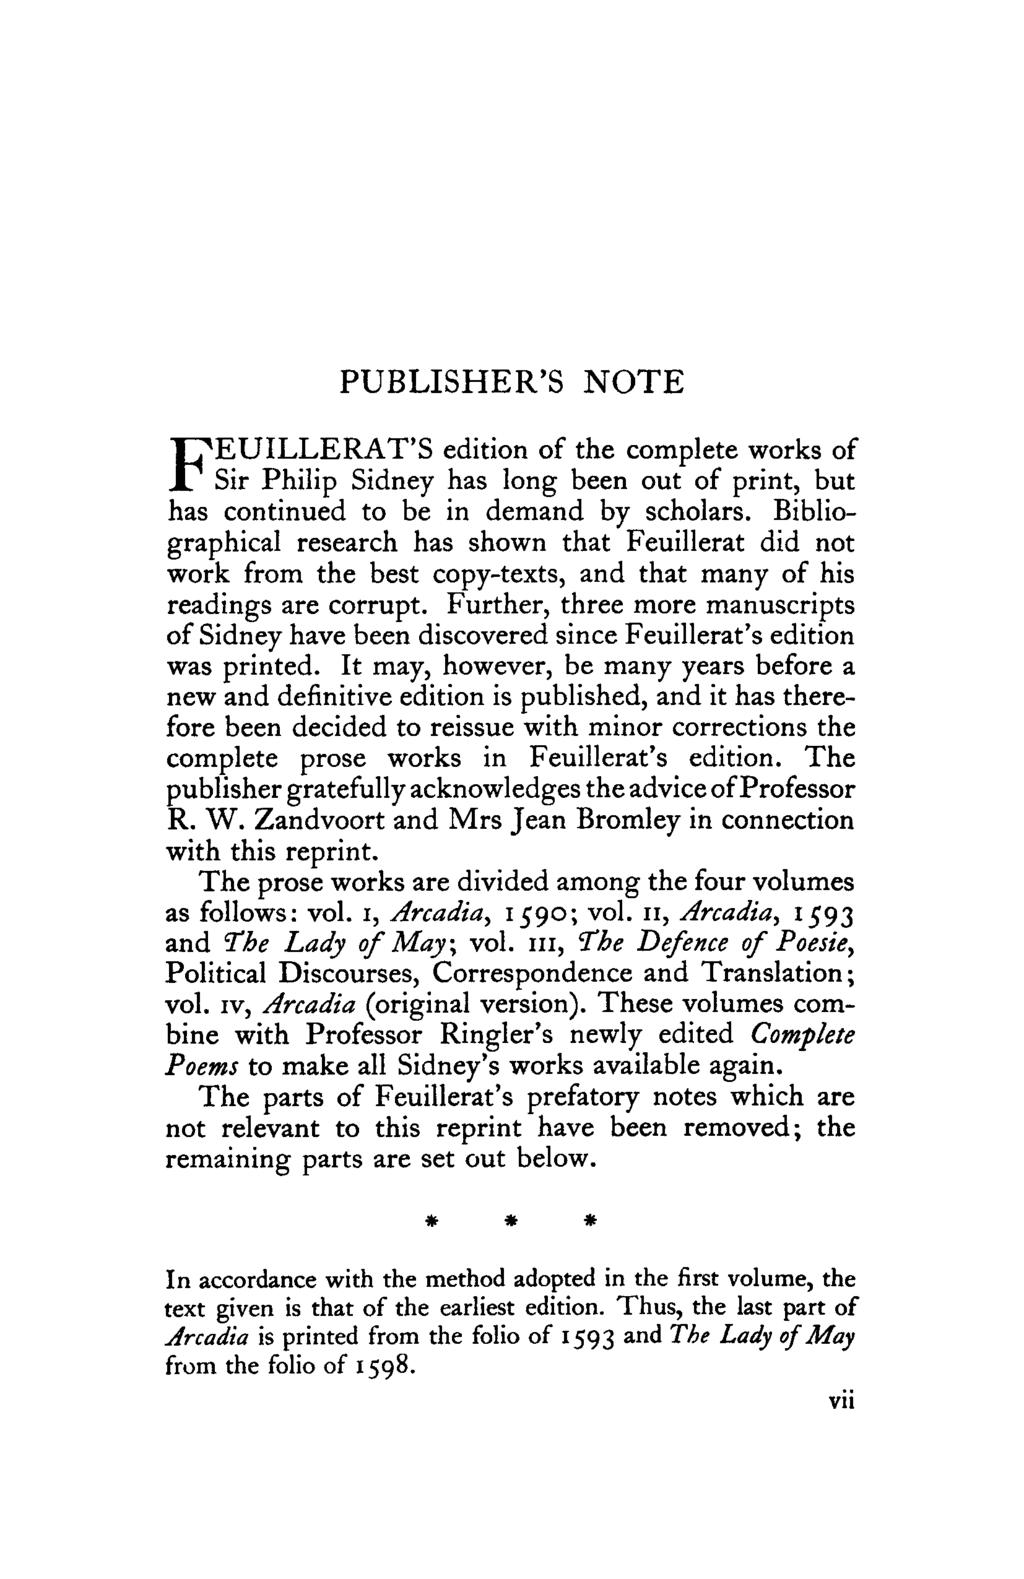 PUBLISHER'S NOTE FEUILLERA T'S edition of the complete works of Sir Philip Sidney has long been out of print, but has continued to be in demand by scholars.